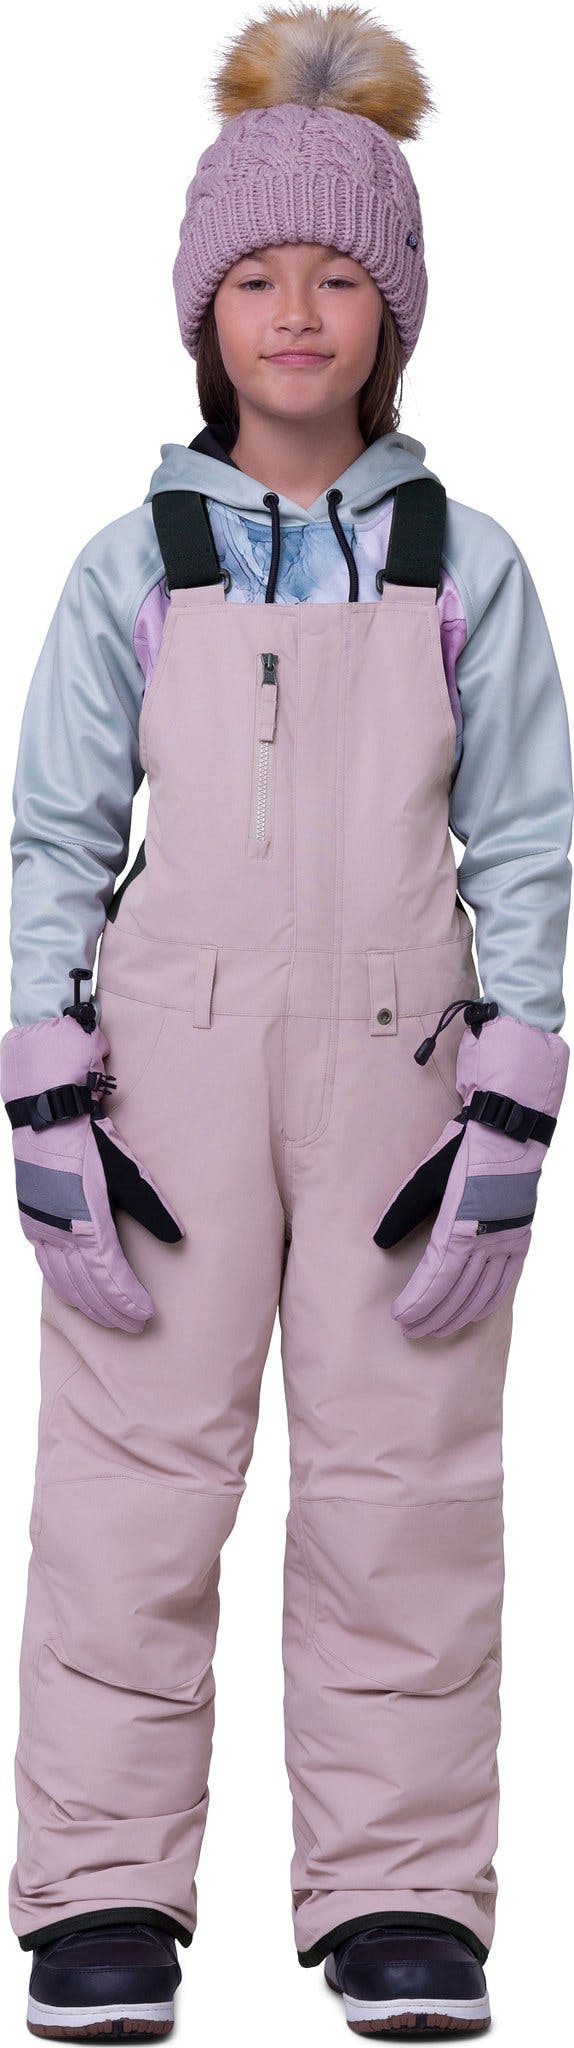 Product image for Sierra Insulated Snowsuit - Girl